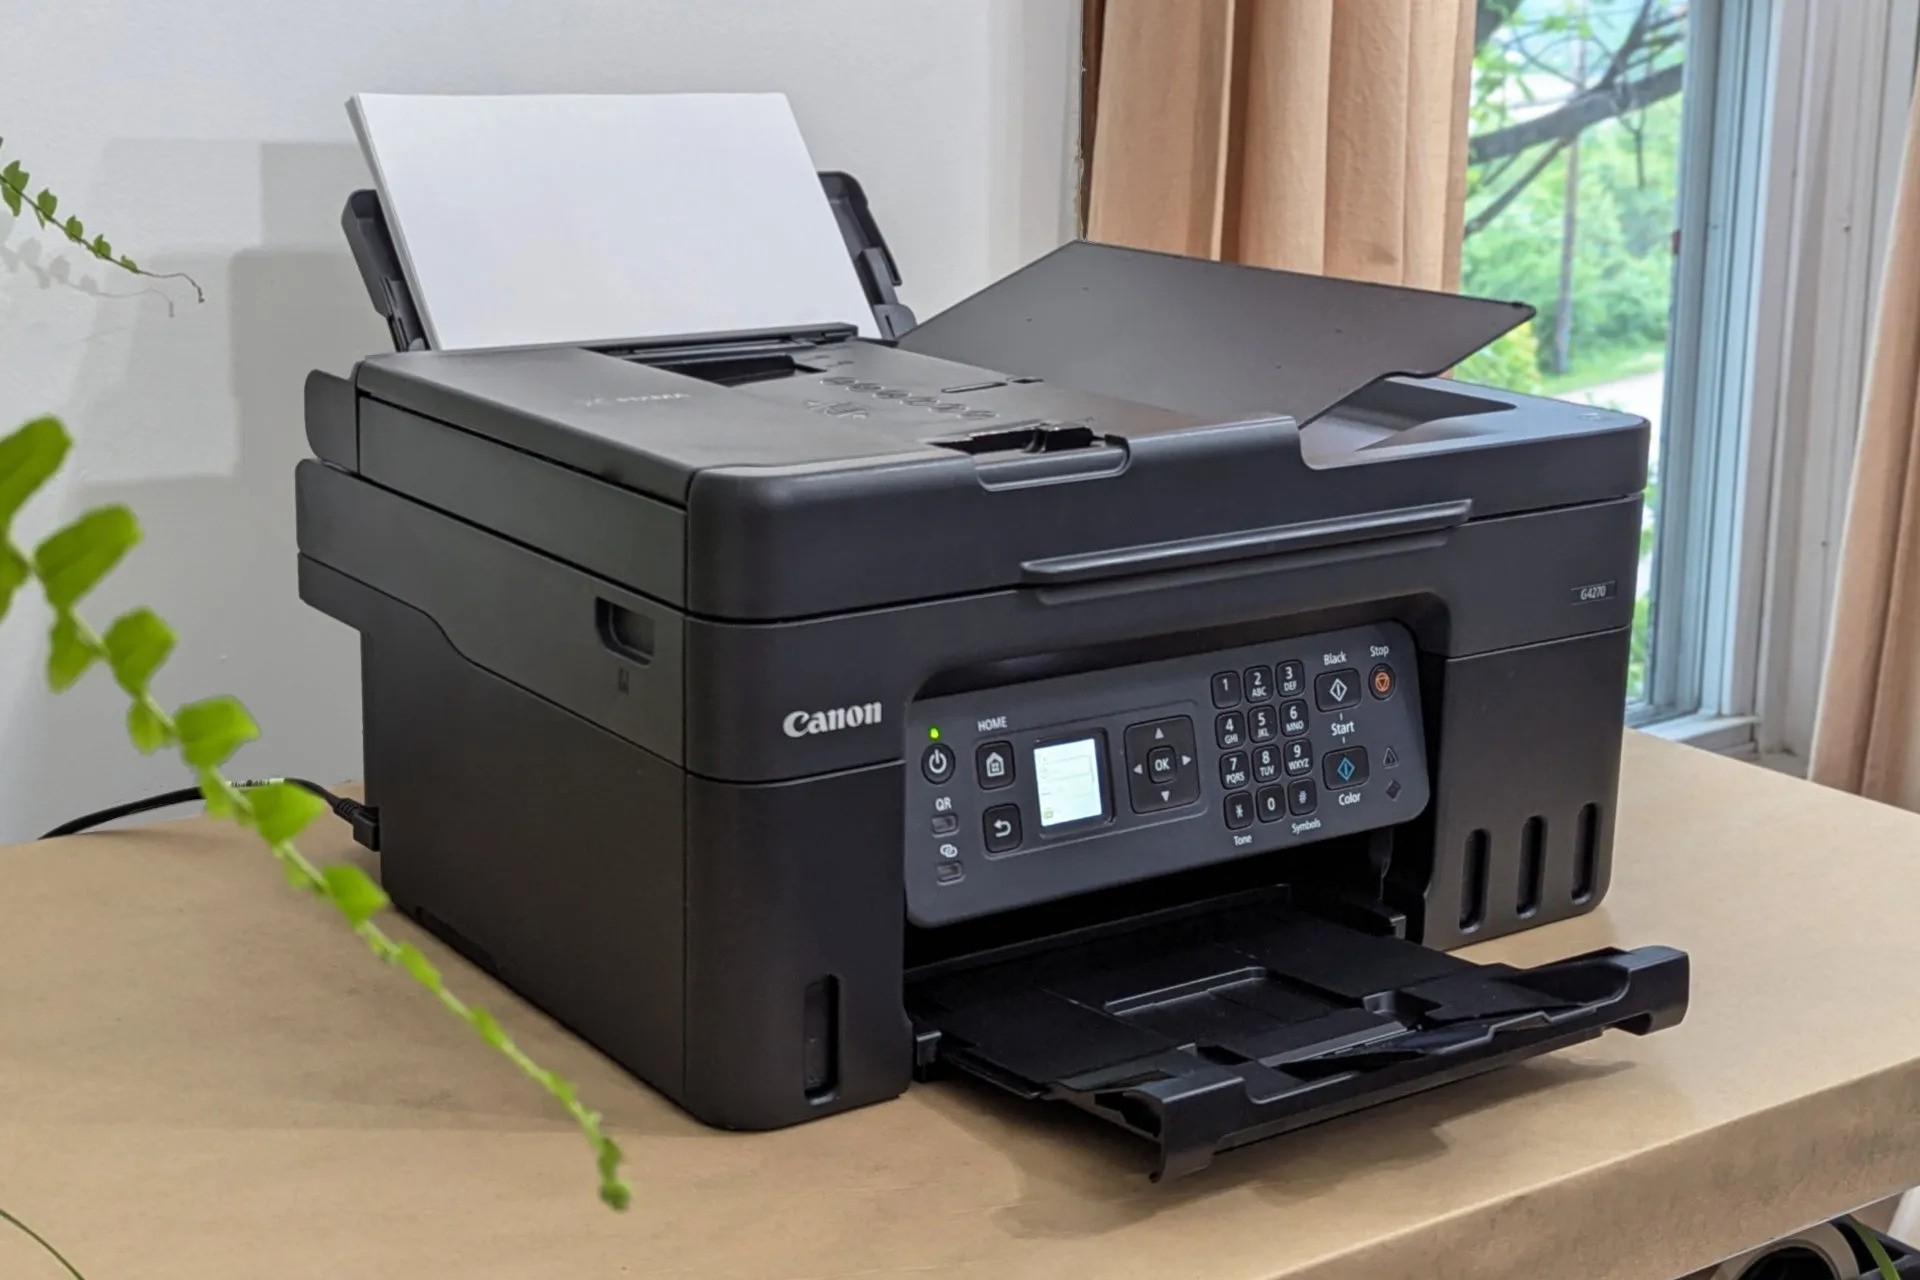 How To Connect Canon Pixma Printer To Wi-Fi